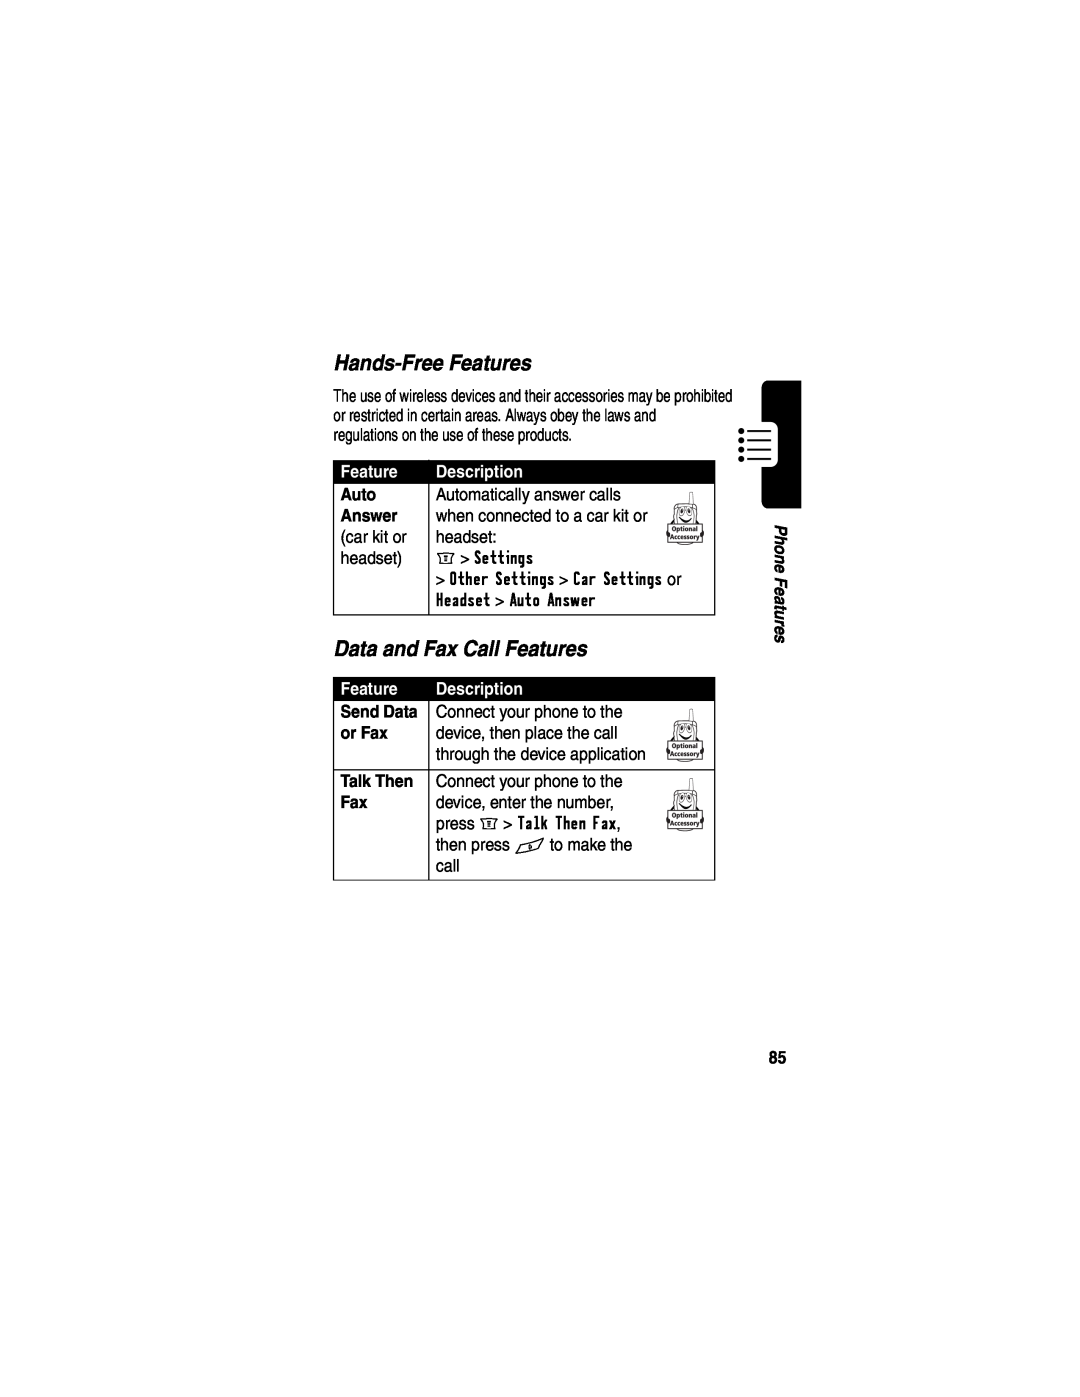 Motorola WIRELESS TELEPHONE manual Hands-FreeFeatures, Data and Fax Call Features, Description 